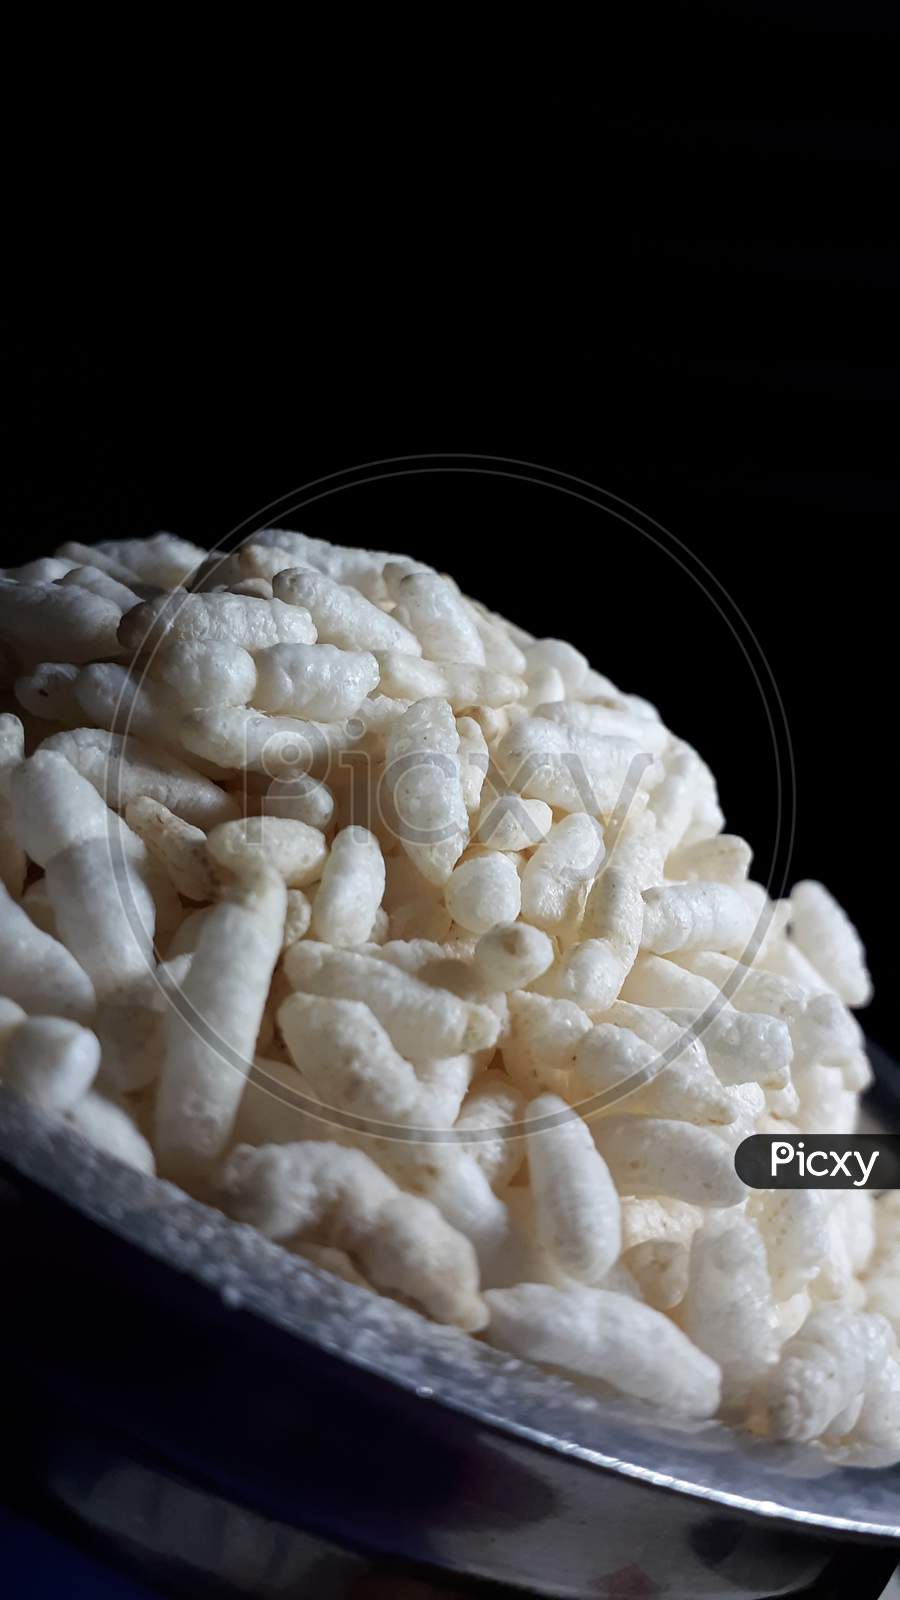 A Picture Of A Cup Of Puffed Rice.